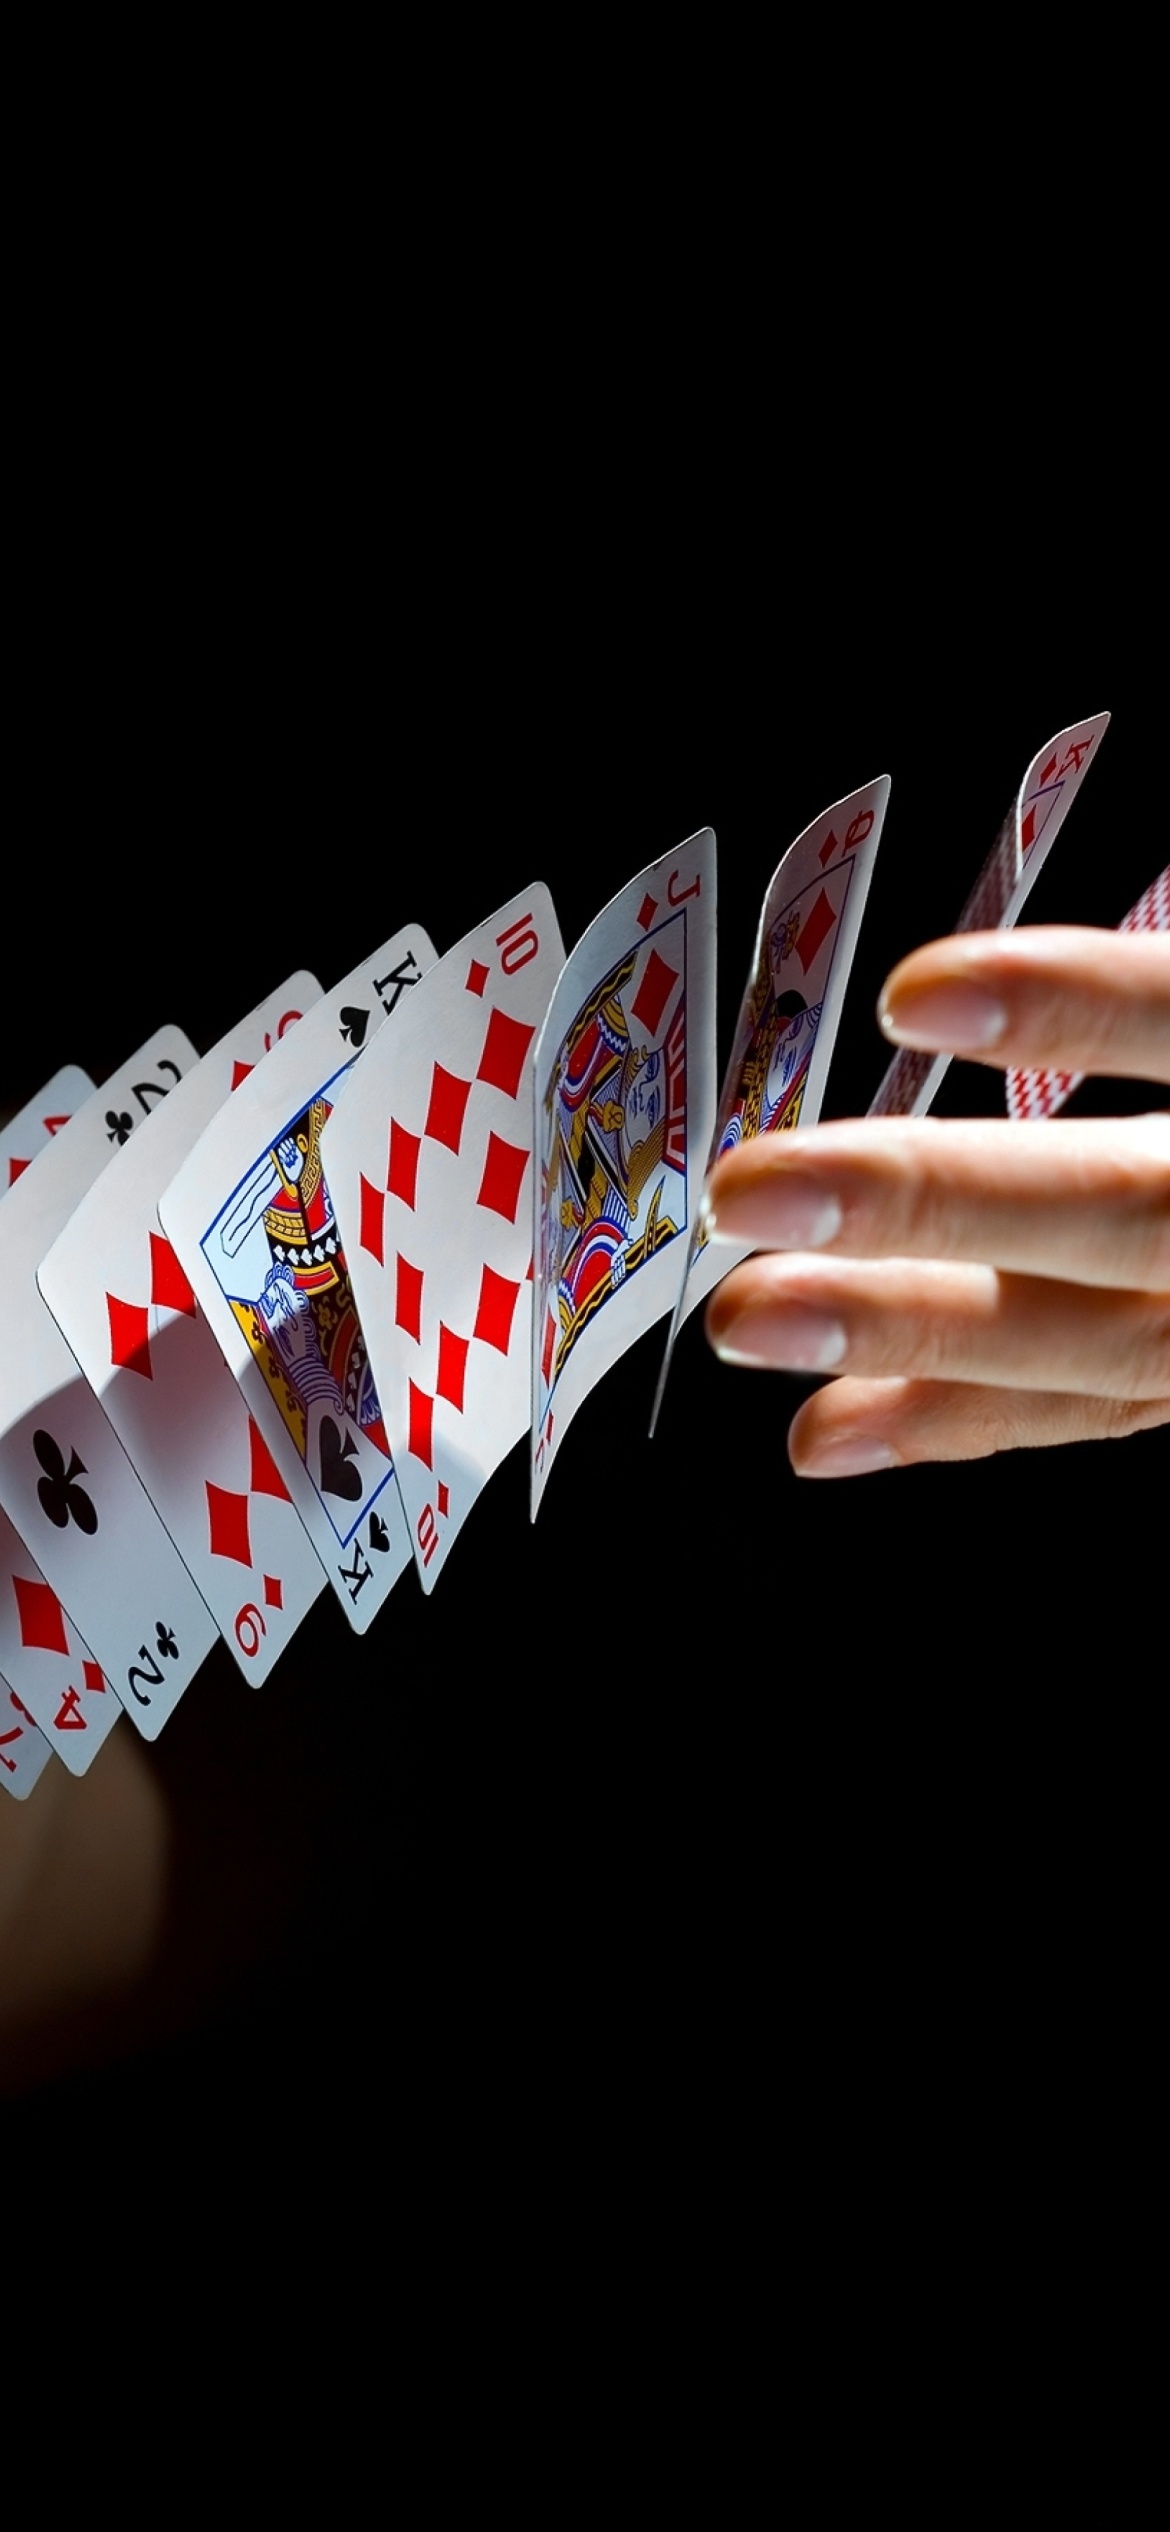 Playing cards trick wallpaper 1170x2532